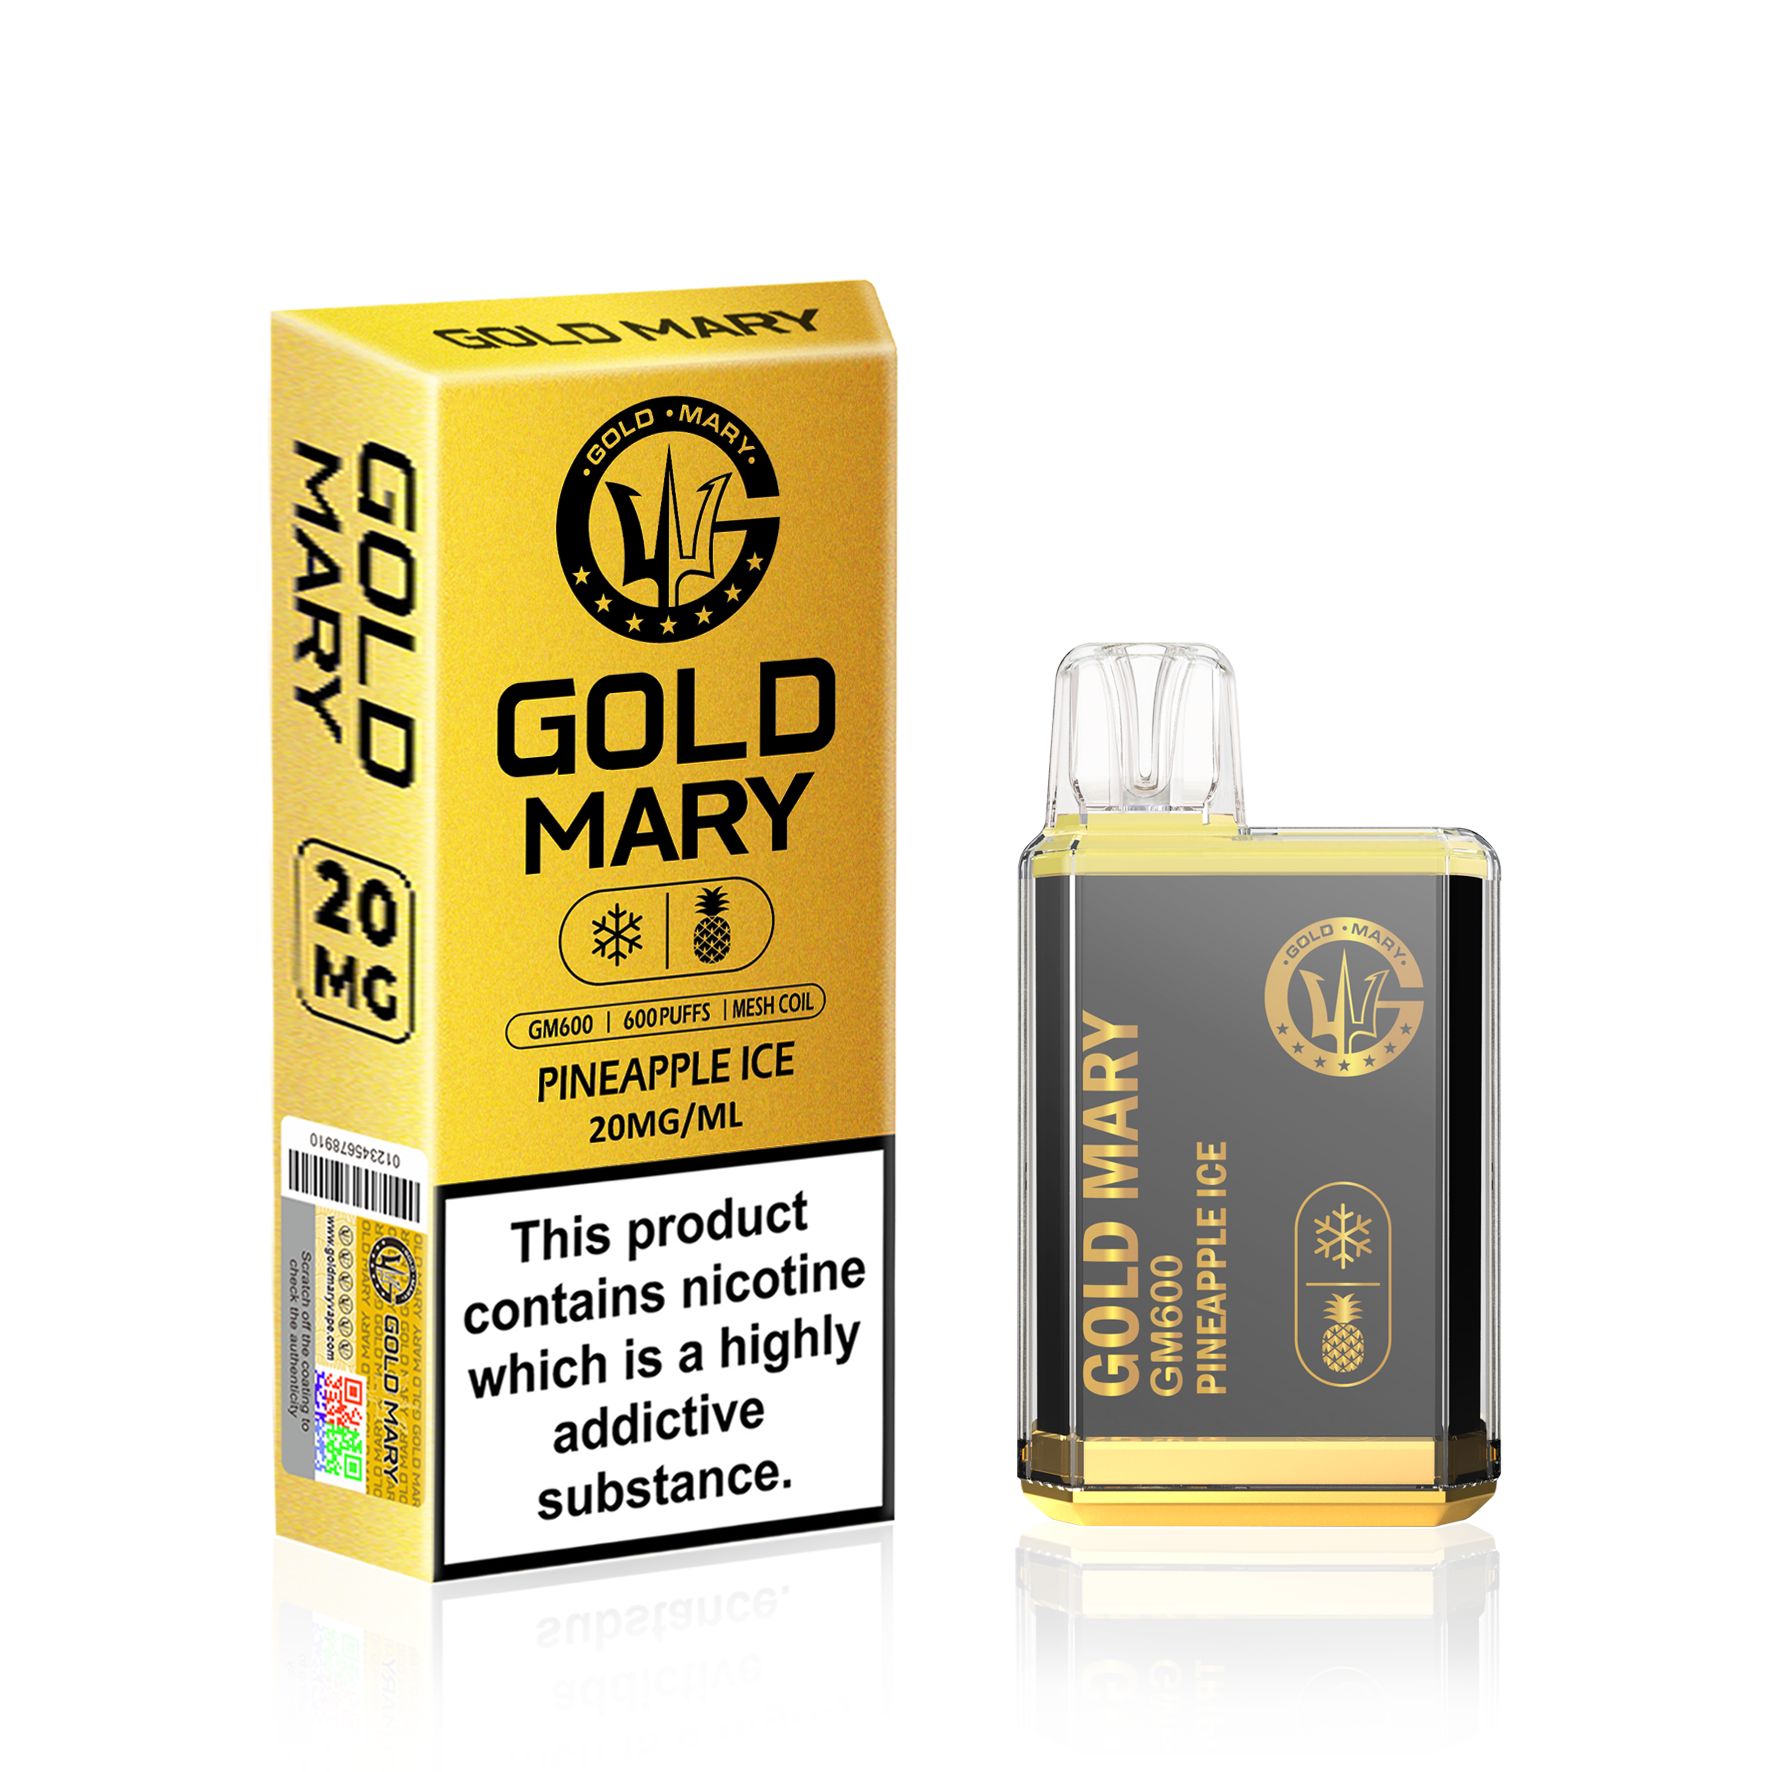 Gold Mary GM600 Disposable Vape Puff Bar Box of 10 - Wolfvapes.co.uk-Pineapple Ice